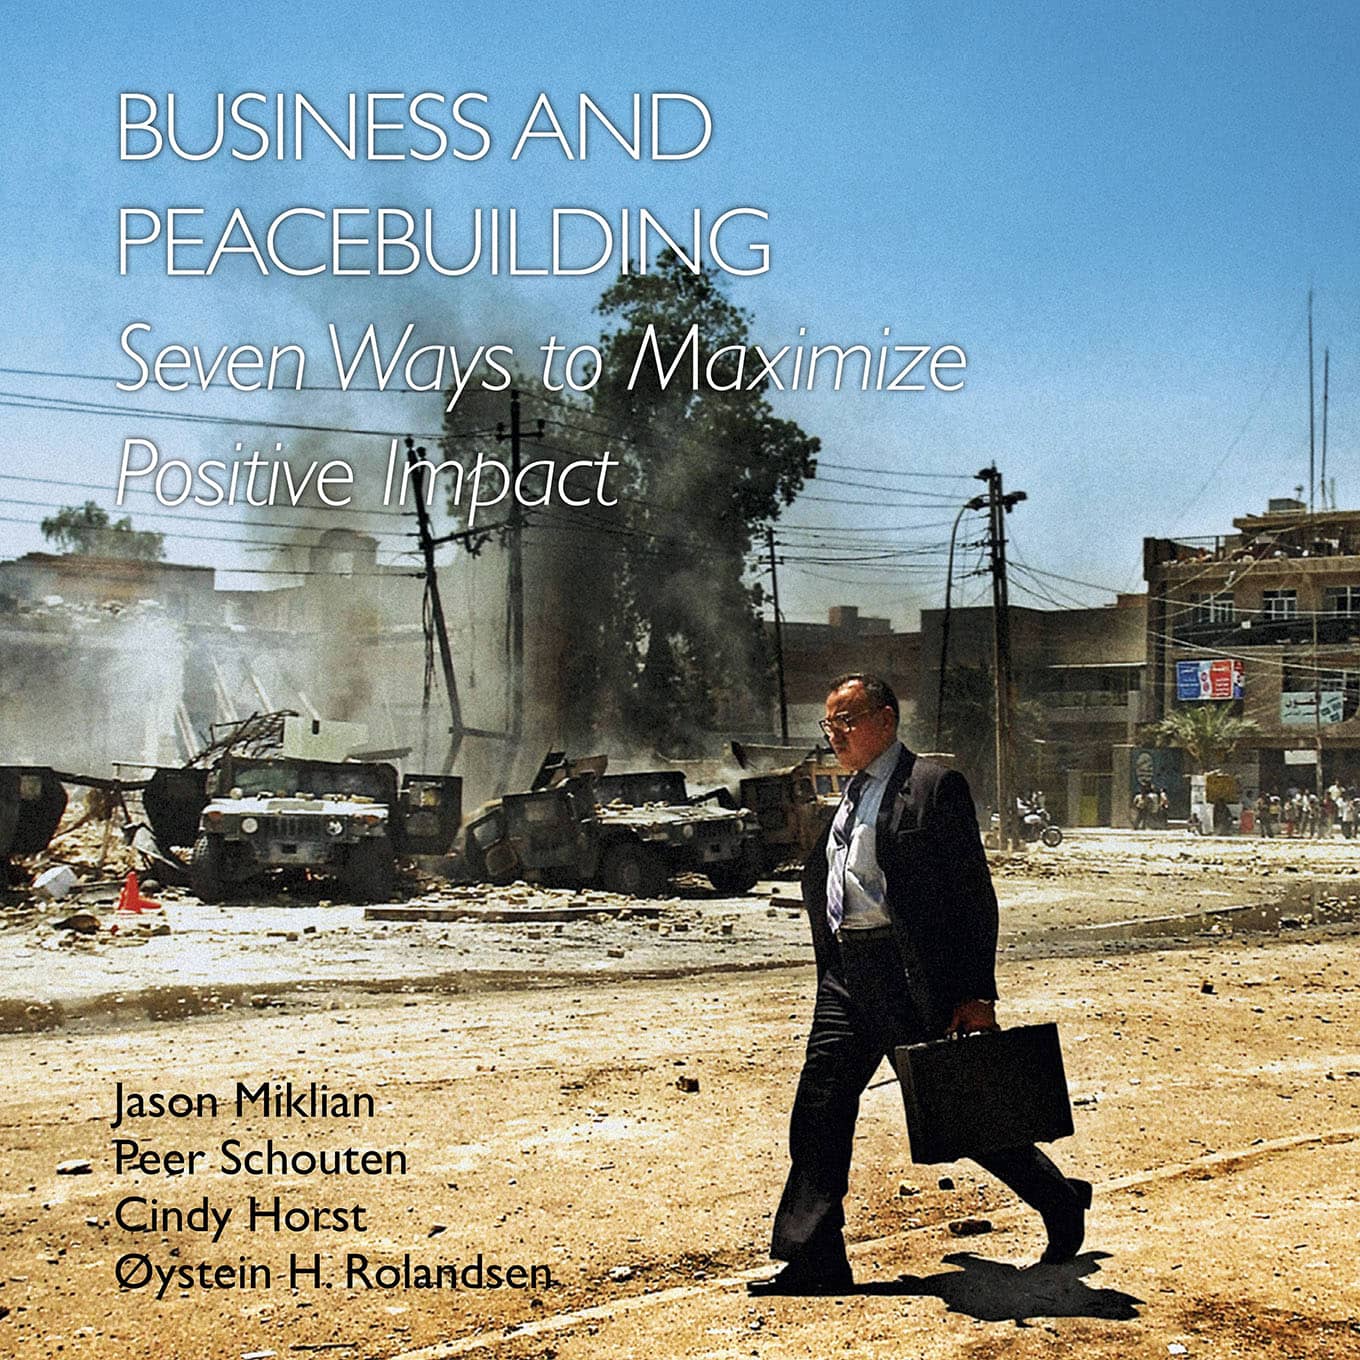 Business and Peacebuilding: Seven Ways to Maximize Positive Impact